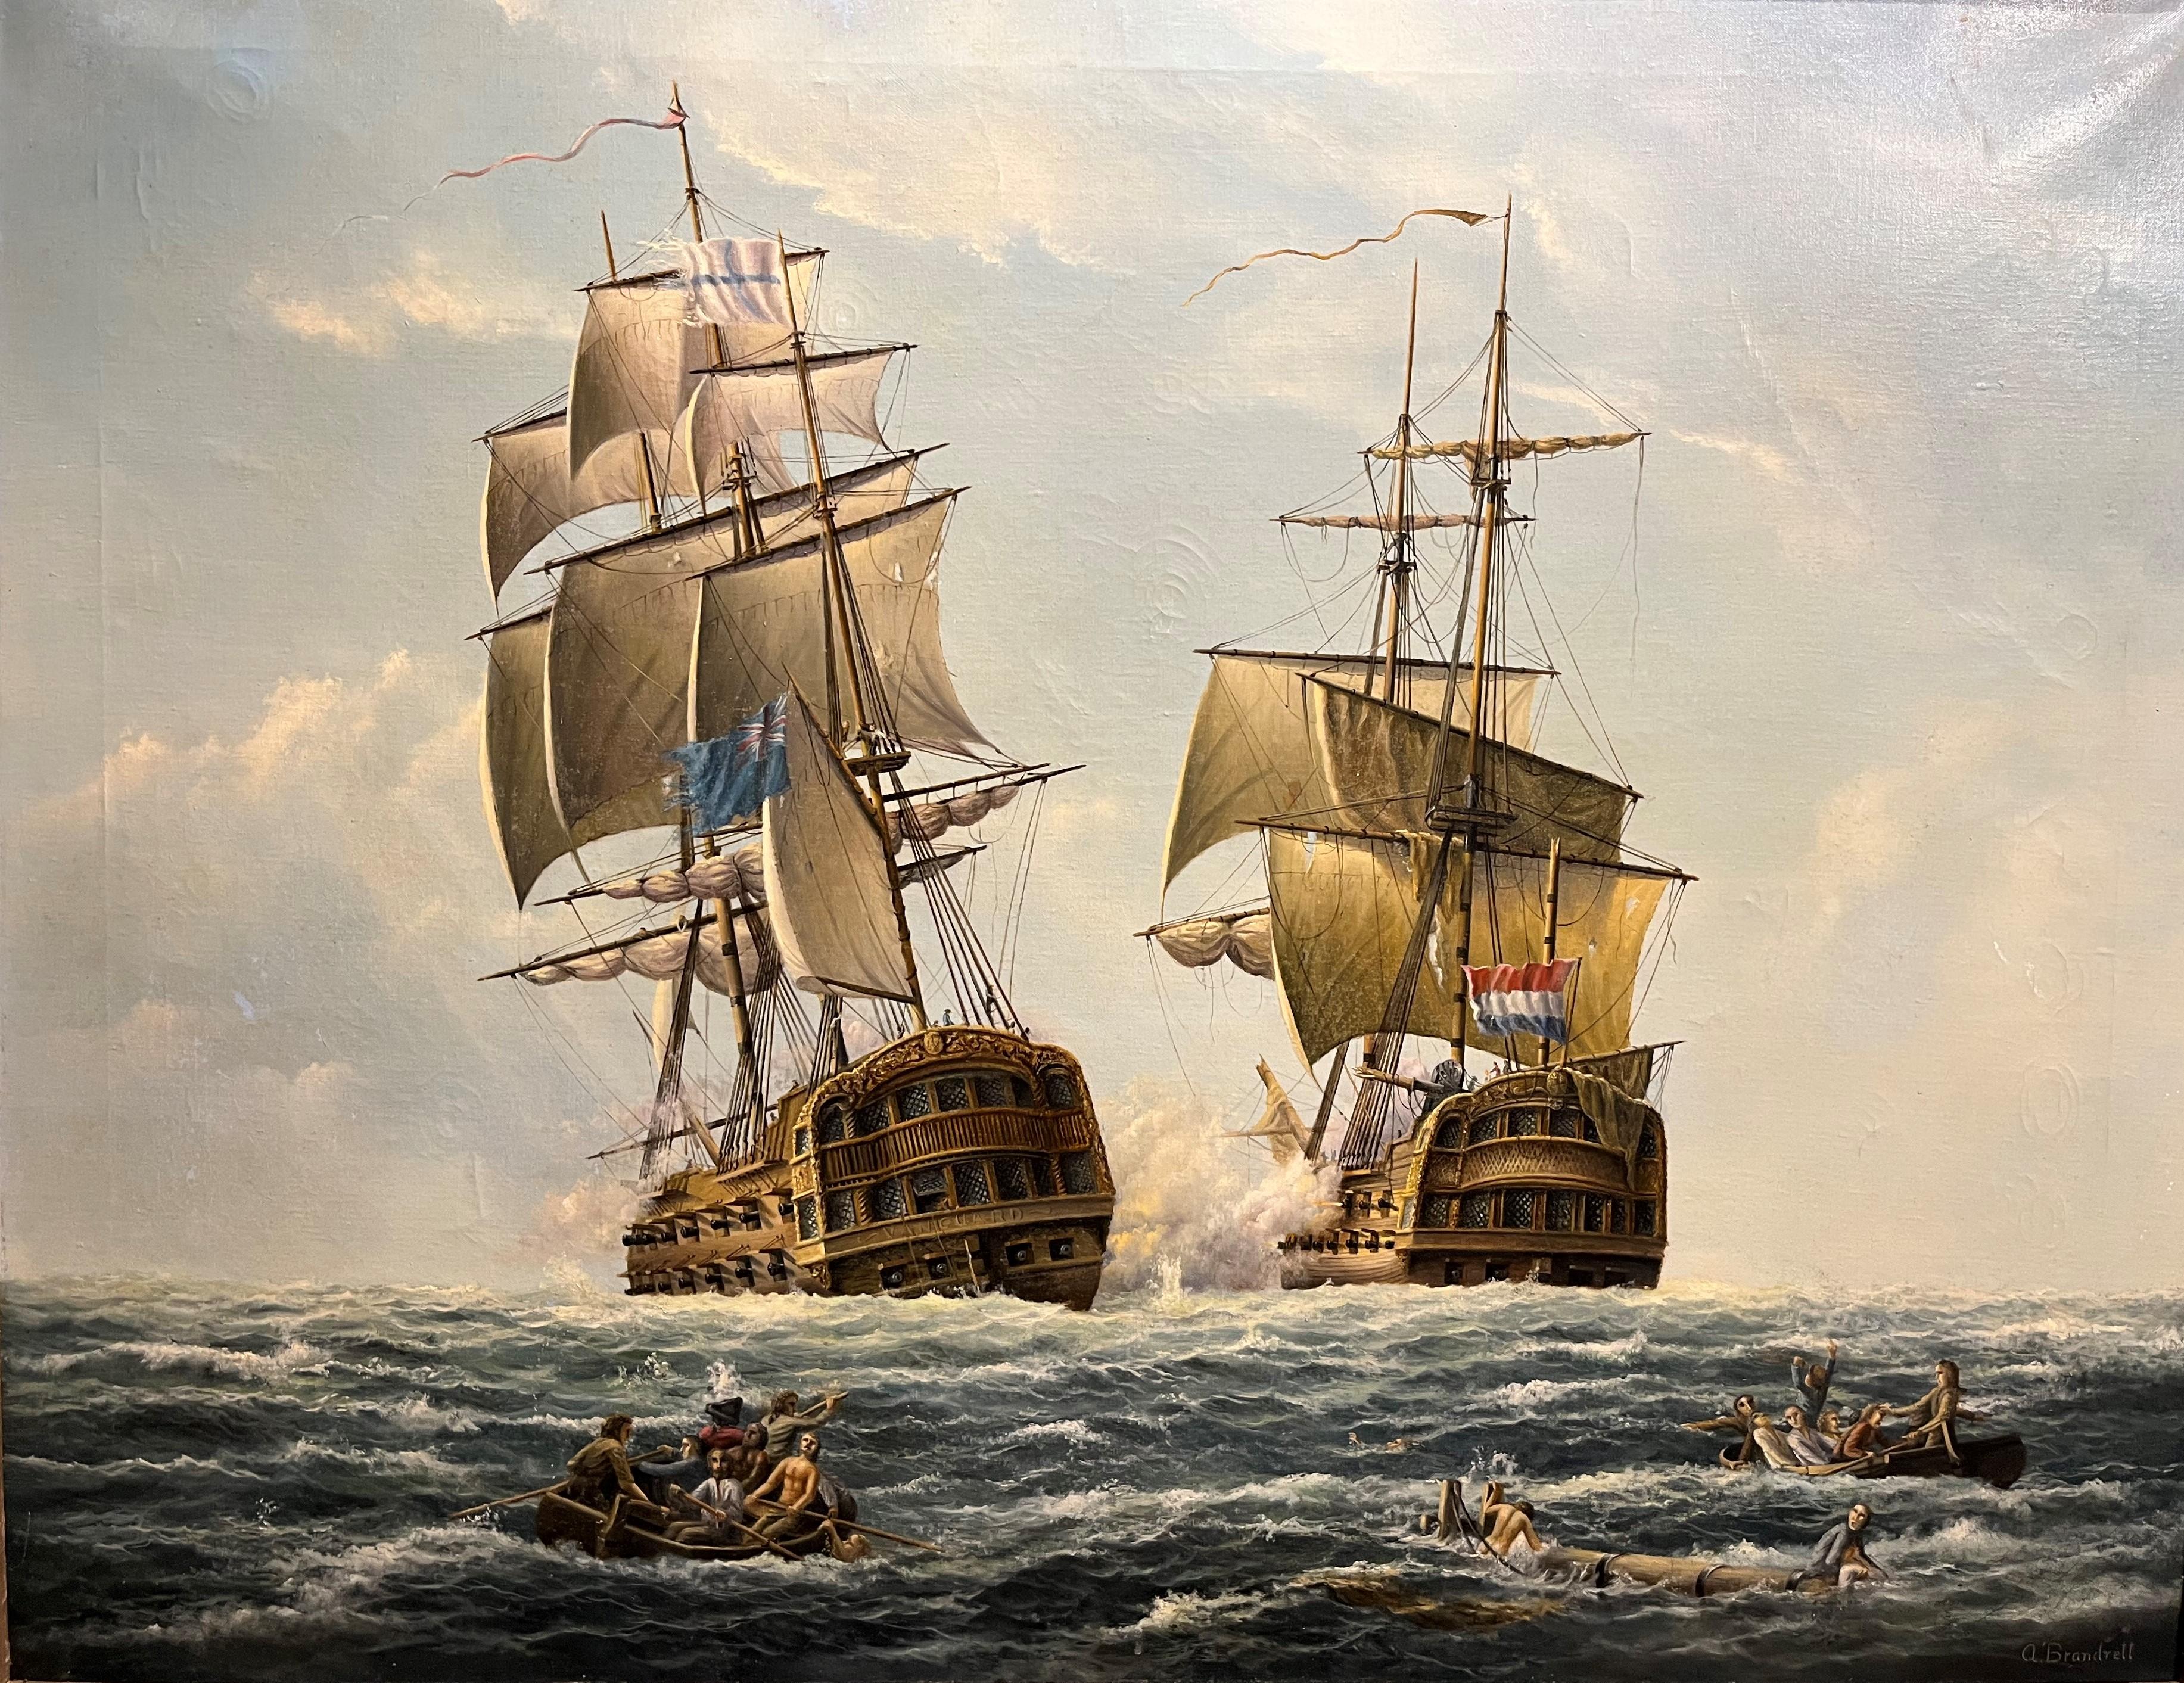 LARGE FINE  20th Century Piece Maritime Battle Scene British oil painting in a Gold Gilt Frame

FINE RARE MARTINE PAINTING ORIGINAL

20th Century OLD MASTER STYLE OIL PAINTING GOLD GILT FRAME

By Similar $10,000 Premier Collection

NEW COLLECTION Of